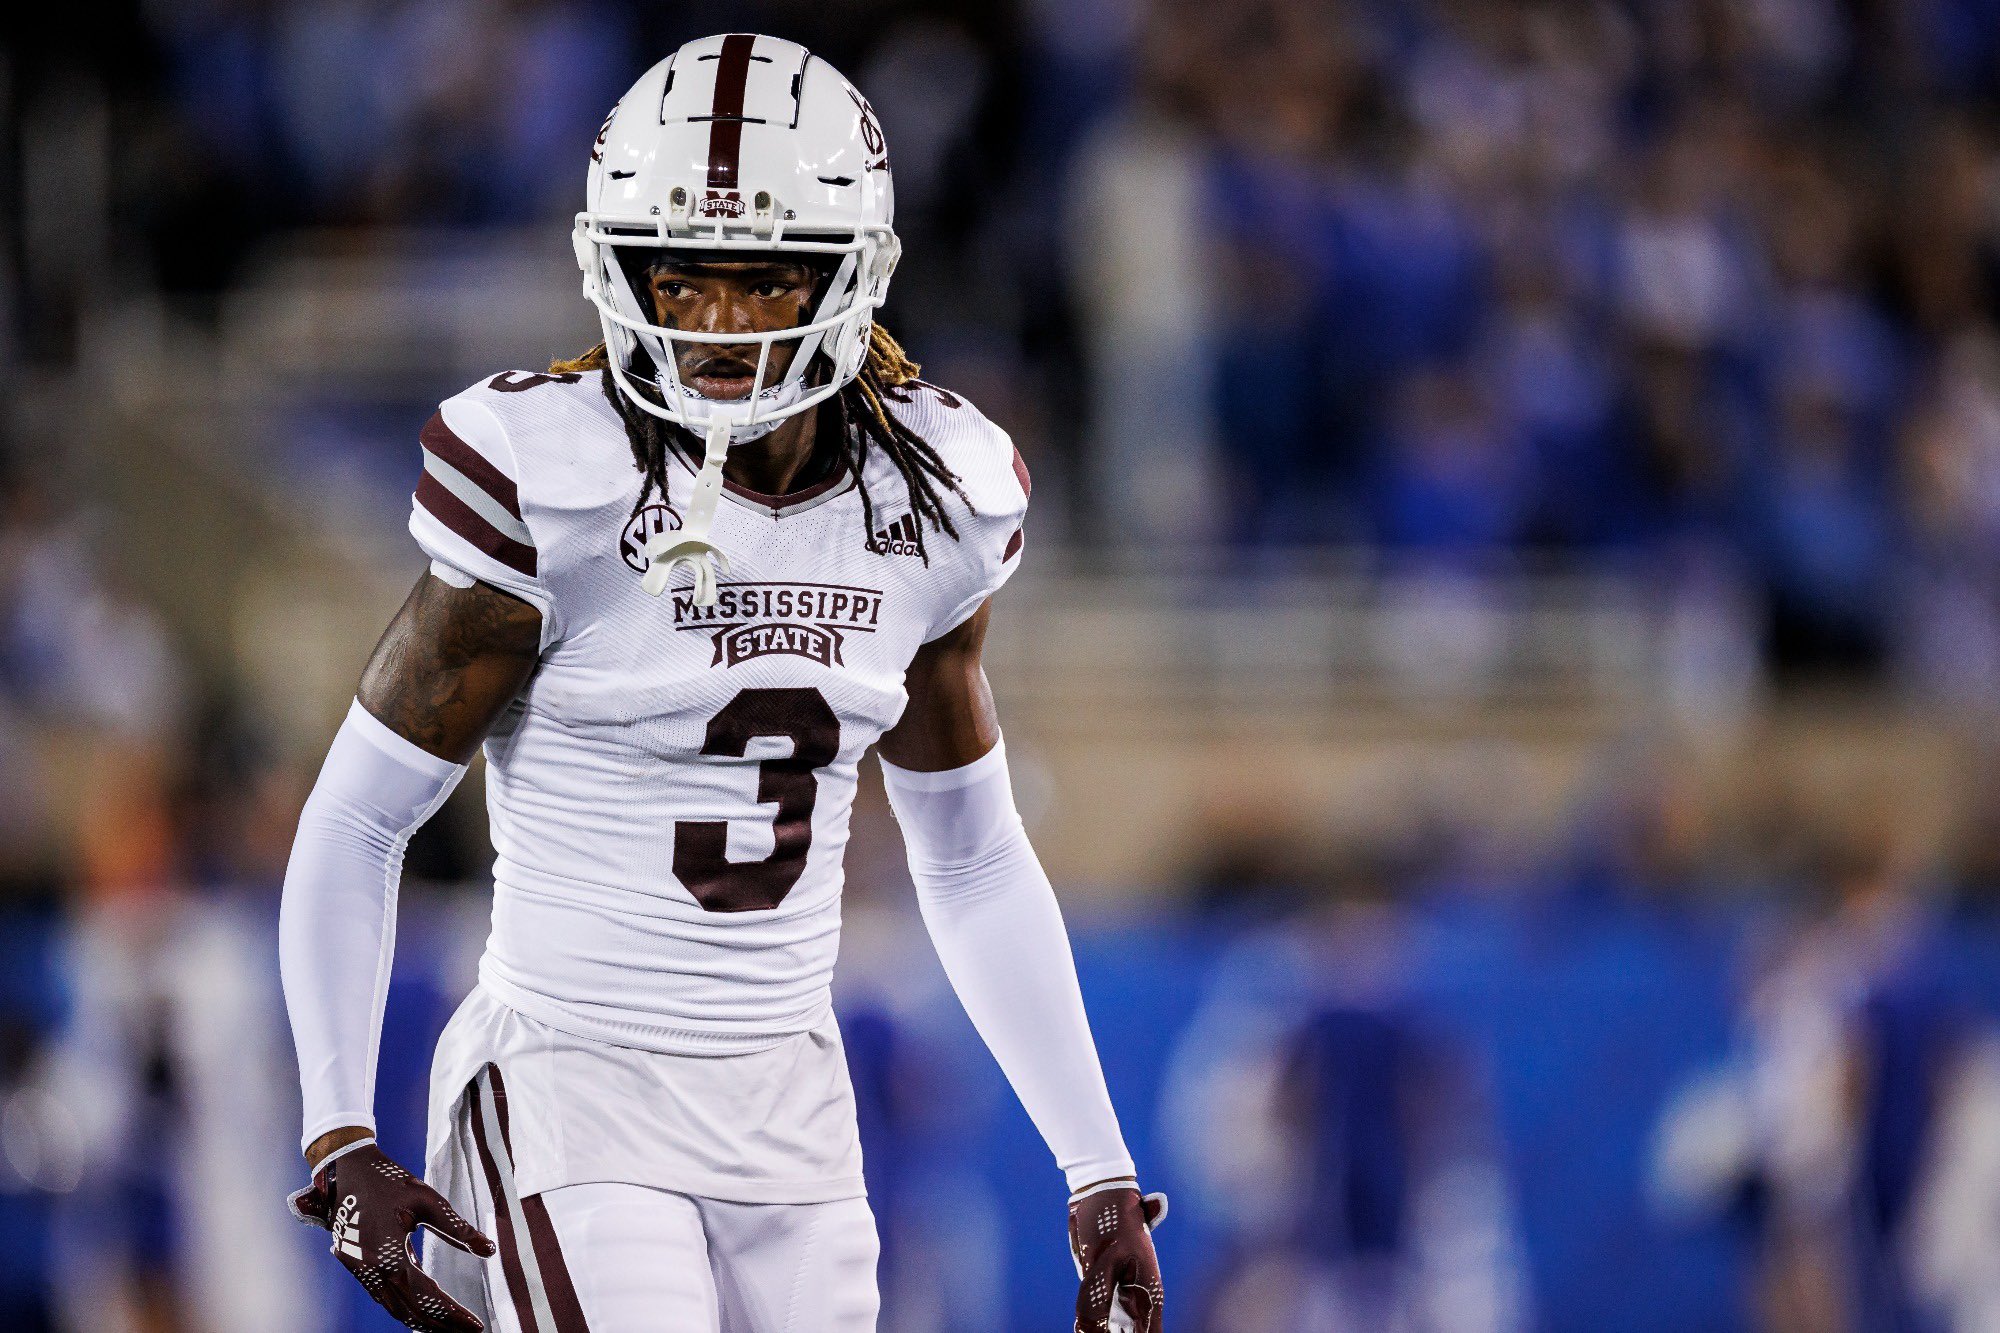 Matt Zenitz on X: Former Mississippi State cornerback Decamerion Richardson,  who committed to Ole Miss as a transfer in December, has instead decided to  declare for the NFL draft. In position to